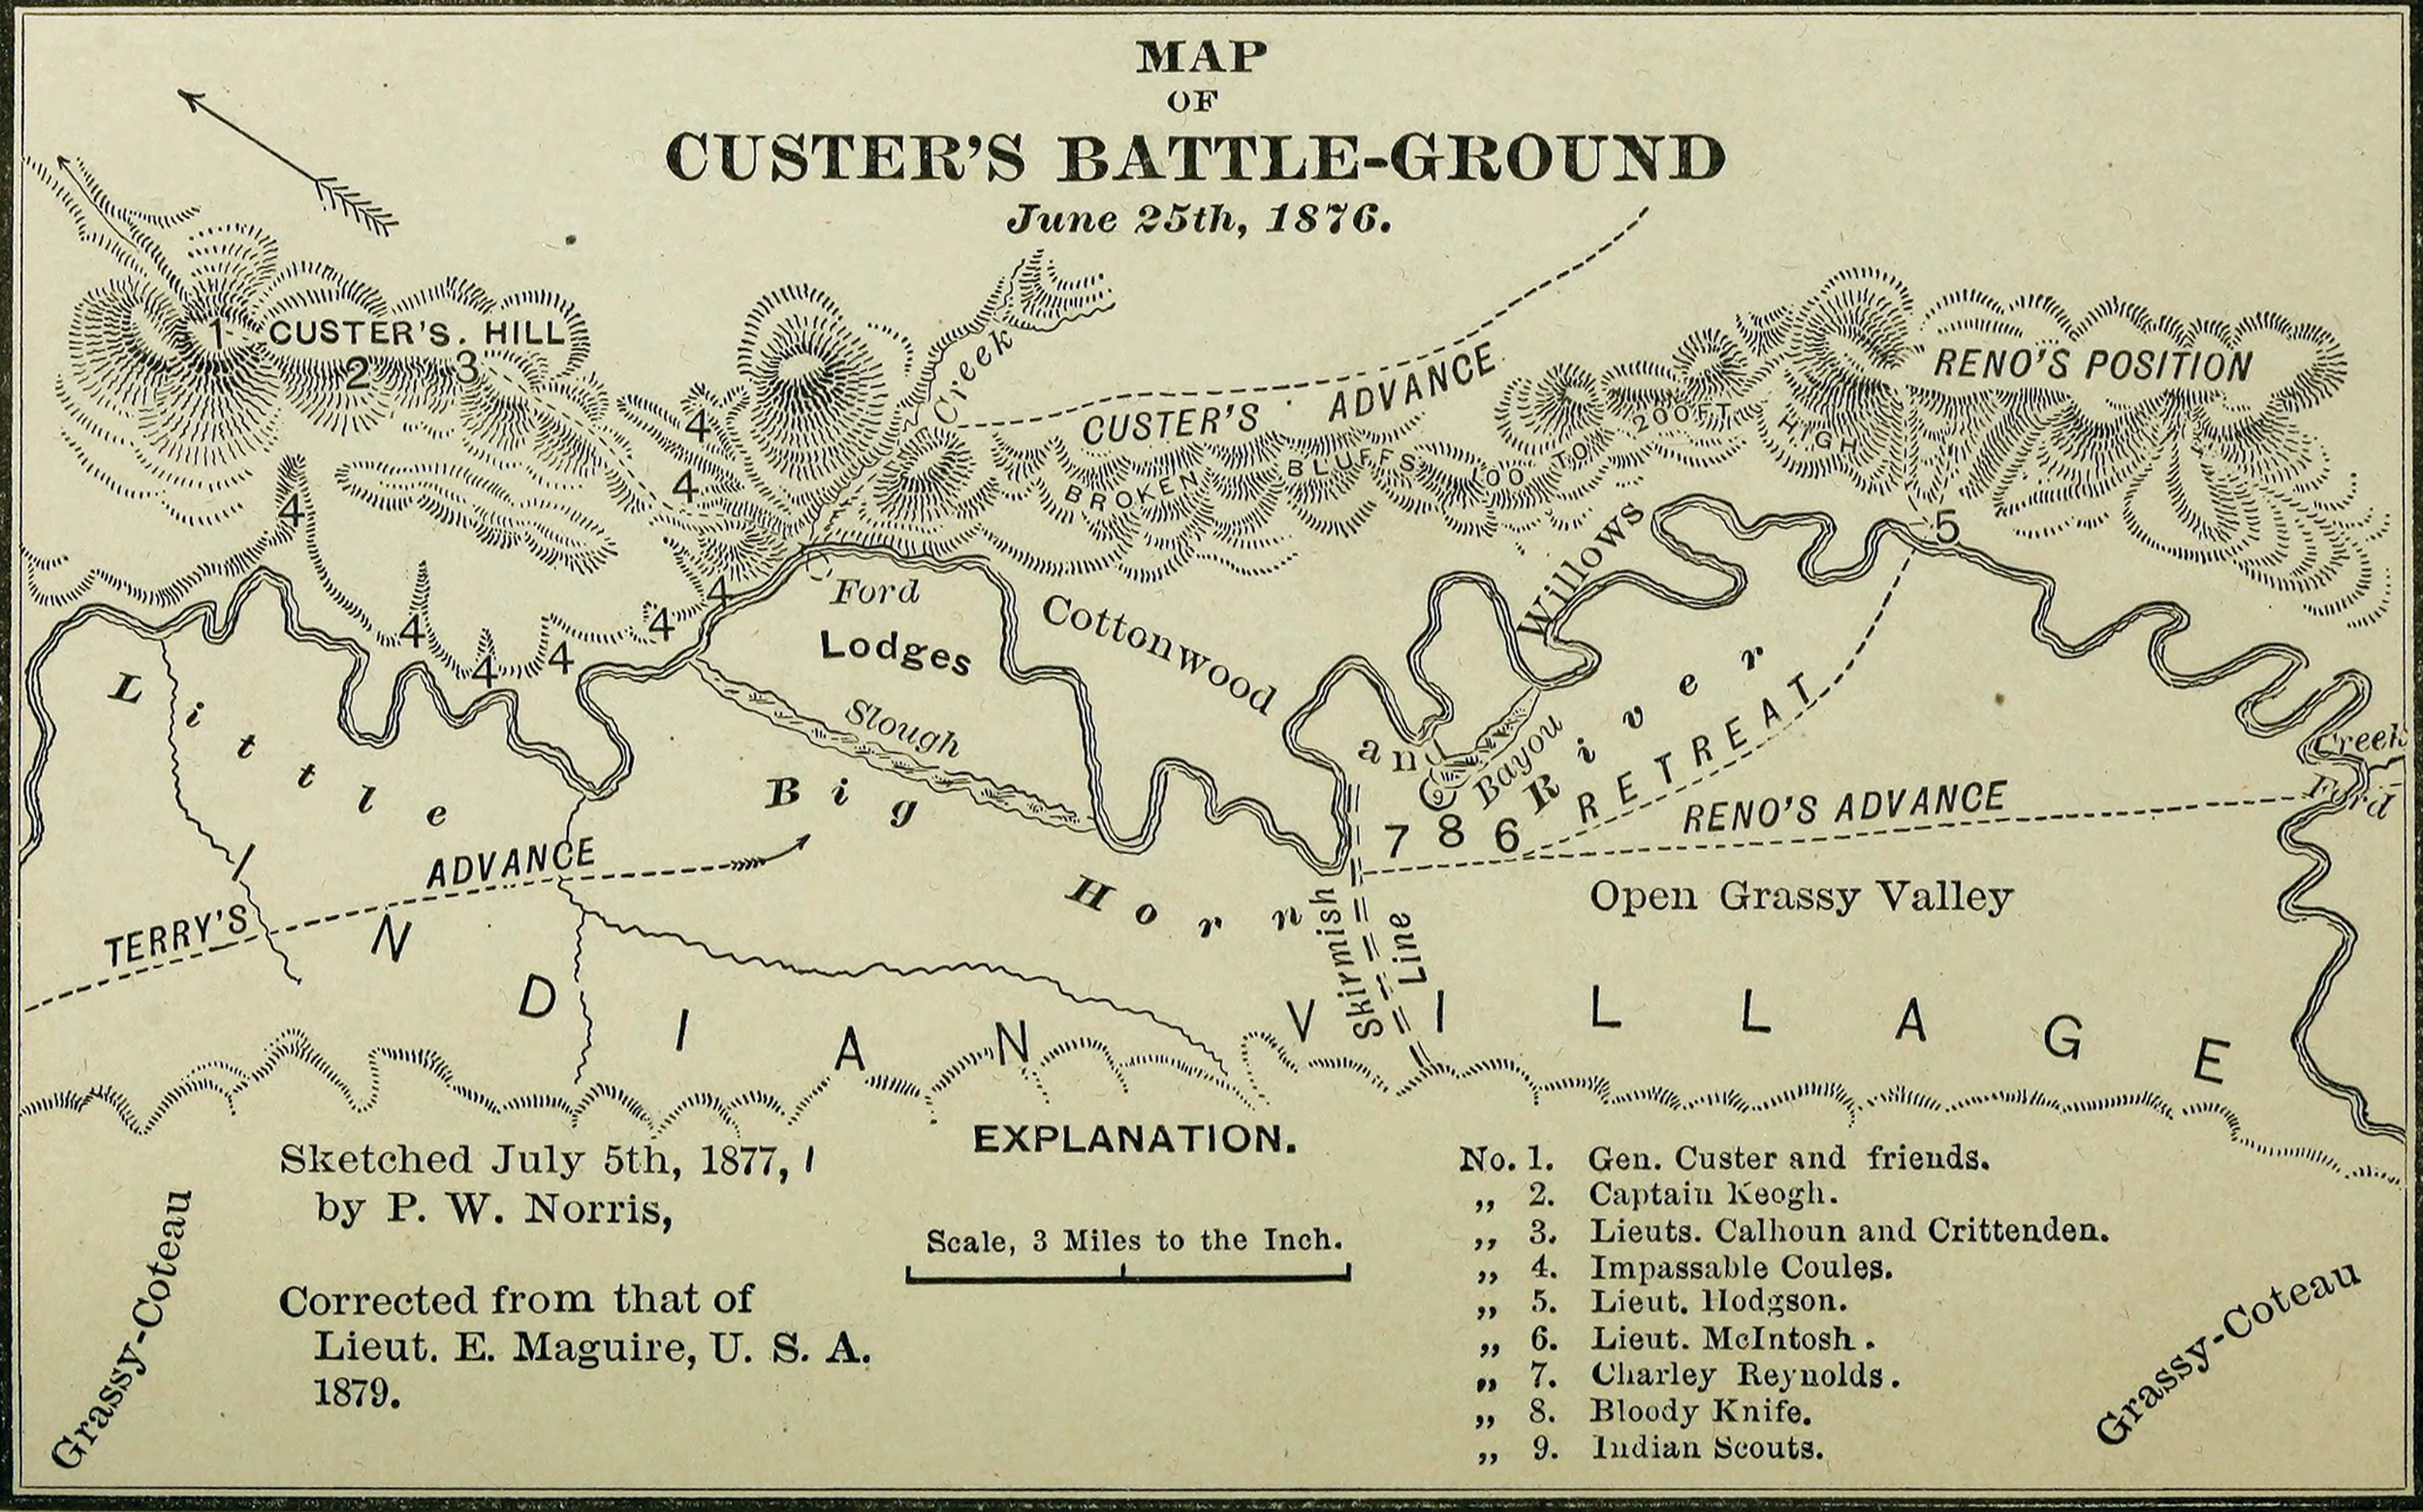 Map of Custer’s Battle-Ground, in Philetus W. Norris, The Calumet of the Coteau, and Other Poetical Legends of the Border (Philadelphia: J.B.
Lippincott and Co., 1883), 42 (U.S. Army/P.W. Norris and E. Maguire/Library of Congress)